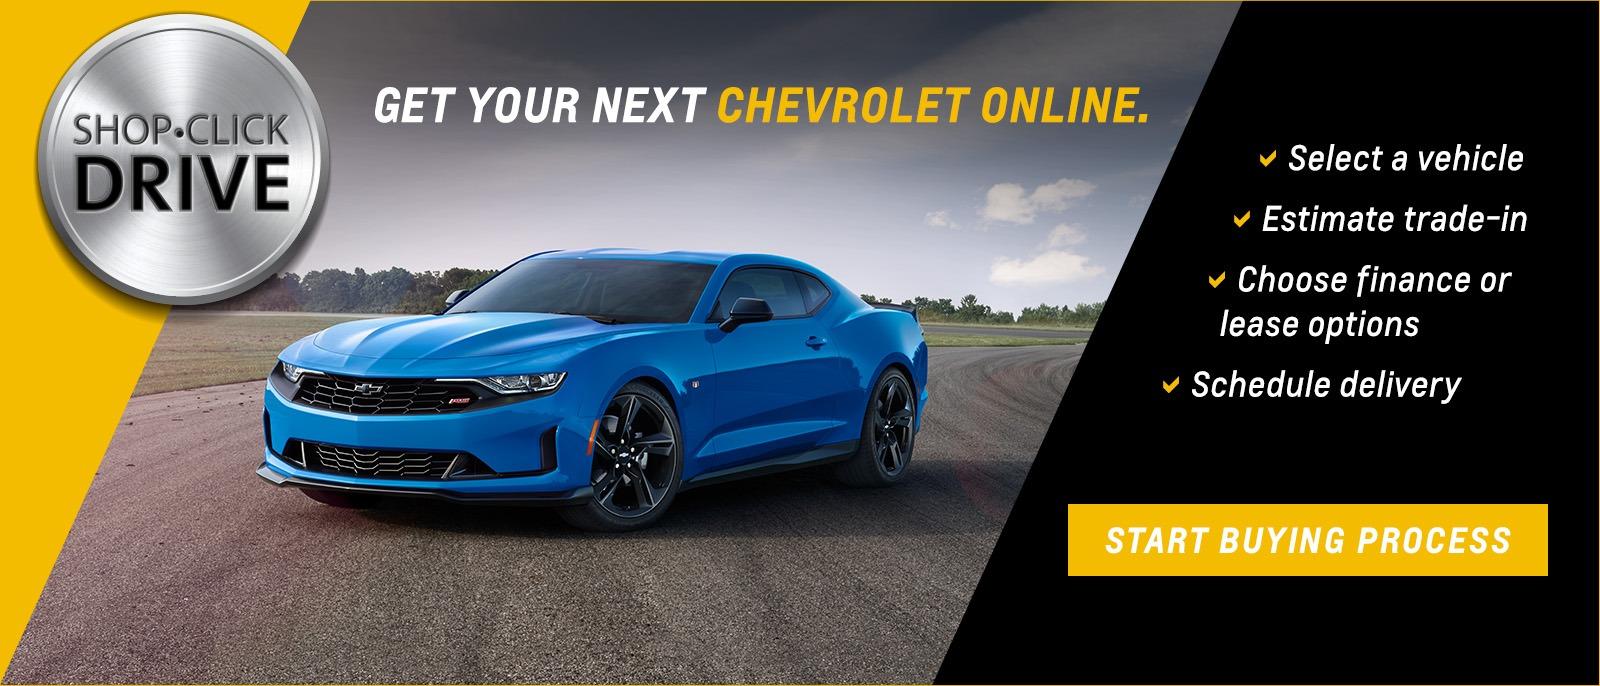 Get you next Chevrolet online 
select a vehicle
Estimate Trade-in
Choose Finance or lease options
Schedule delivery